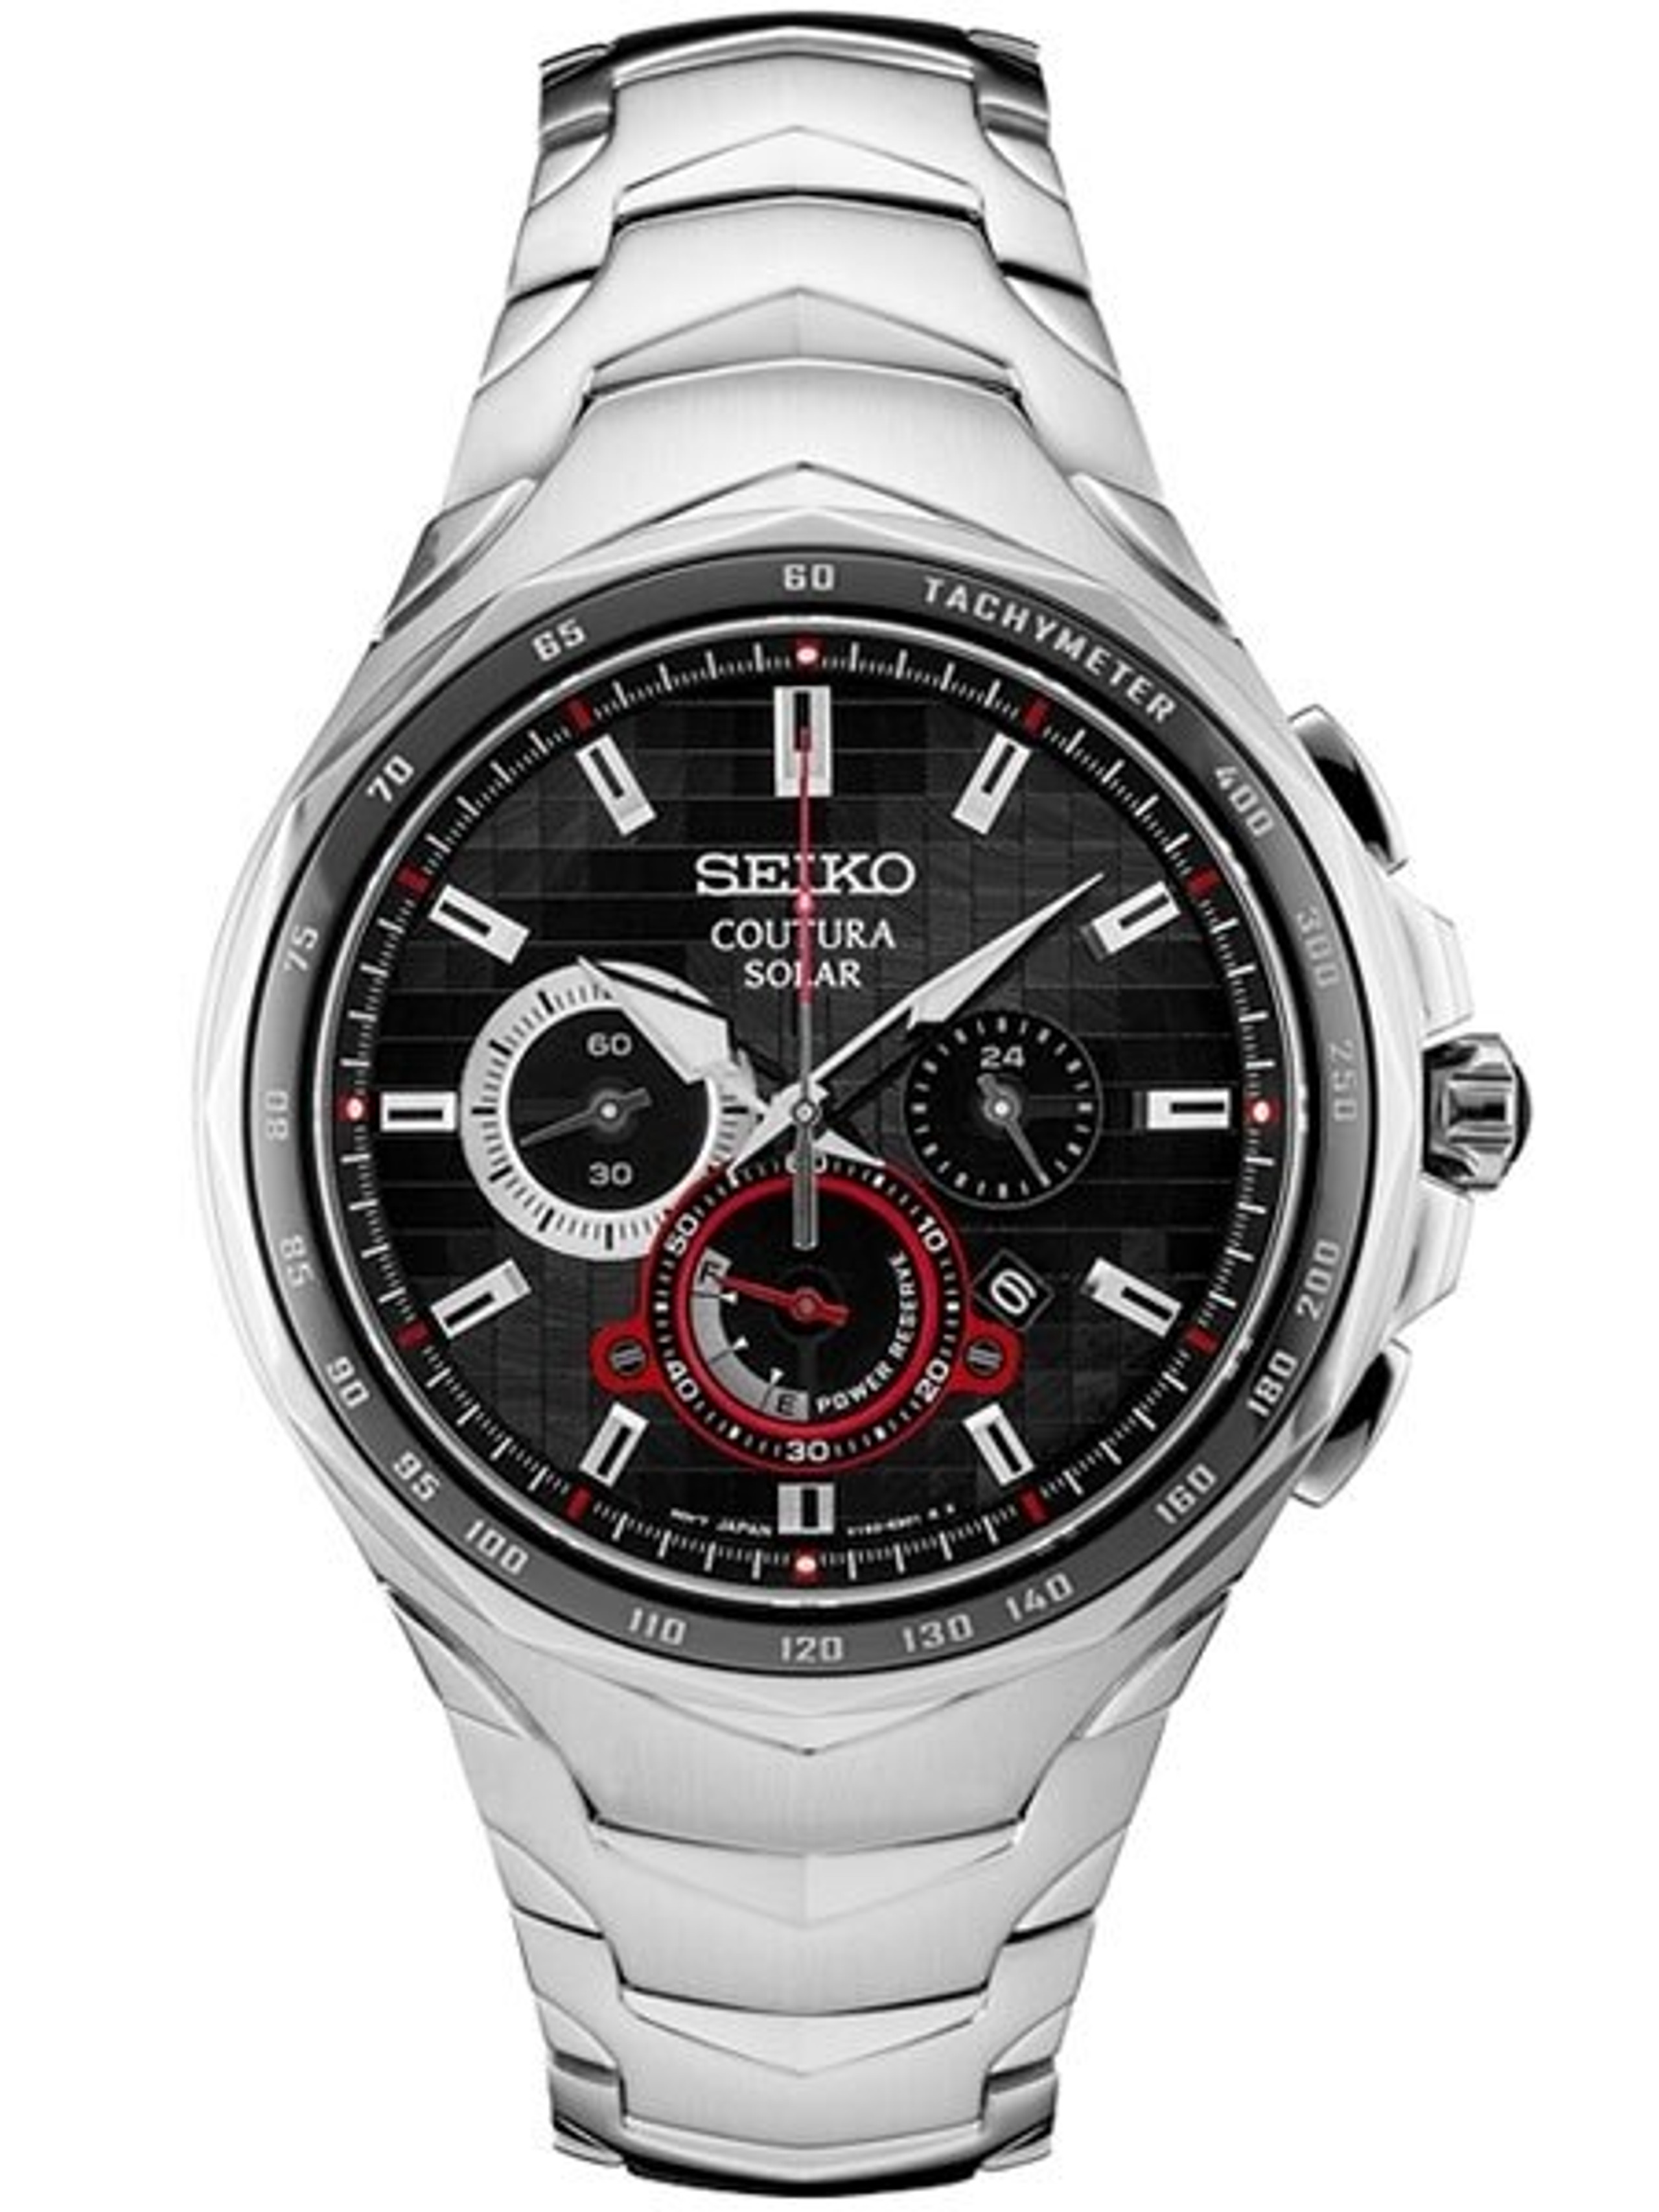 Seiko SSC743 Solar Coutura Chronograph Watch with 24-hour sub-dial and ...